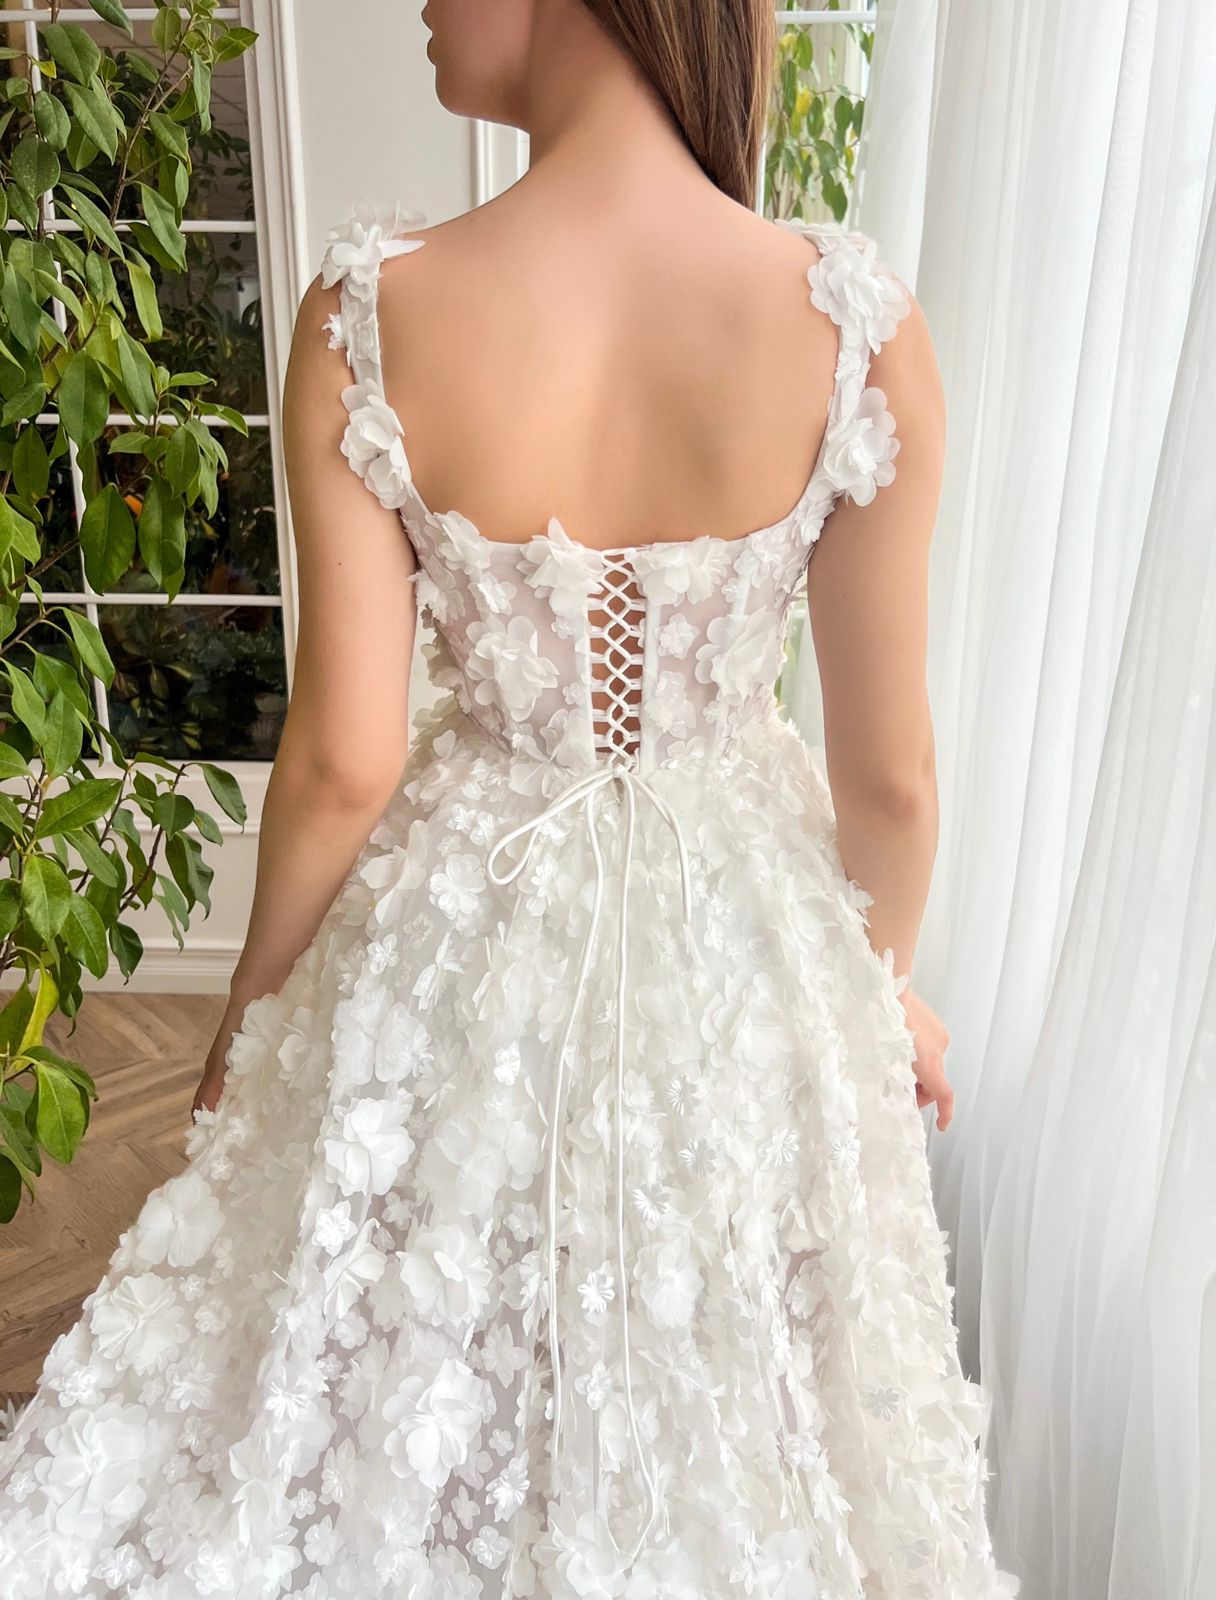 White A-Line bridal dress with spaghetti straps, lace and embroidery